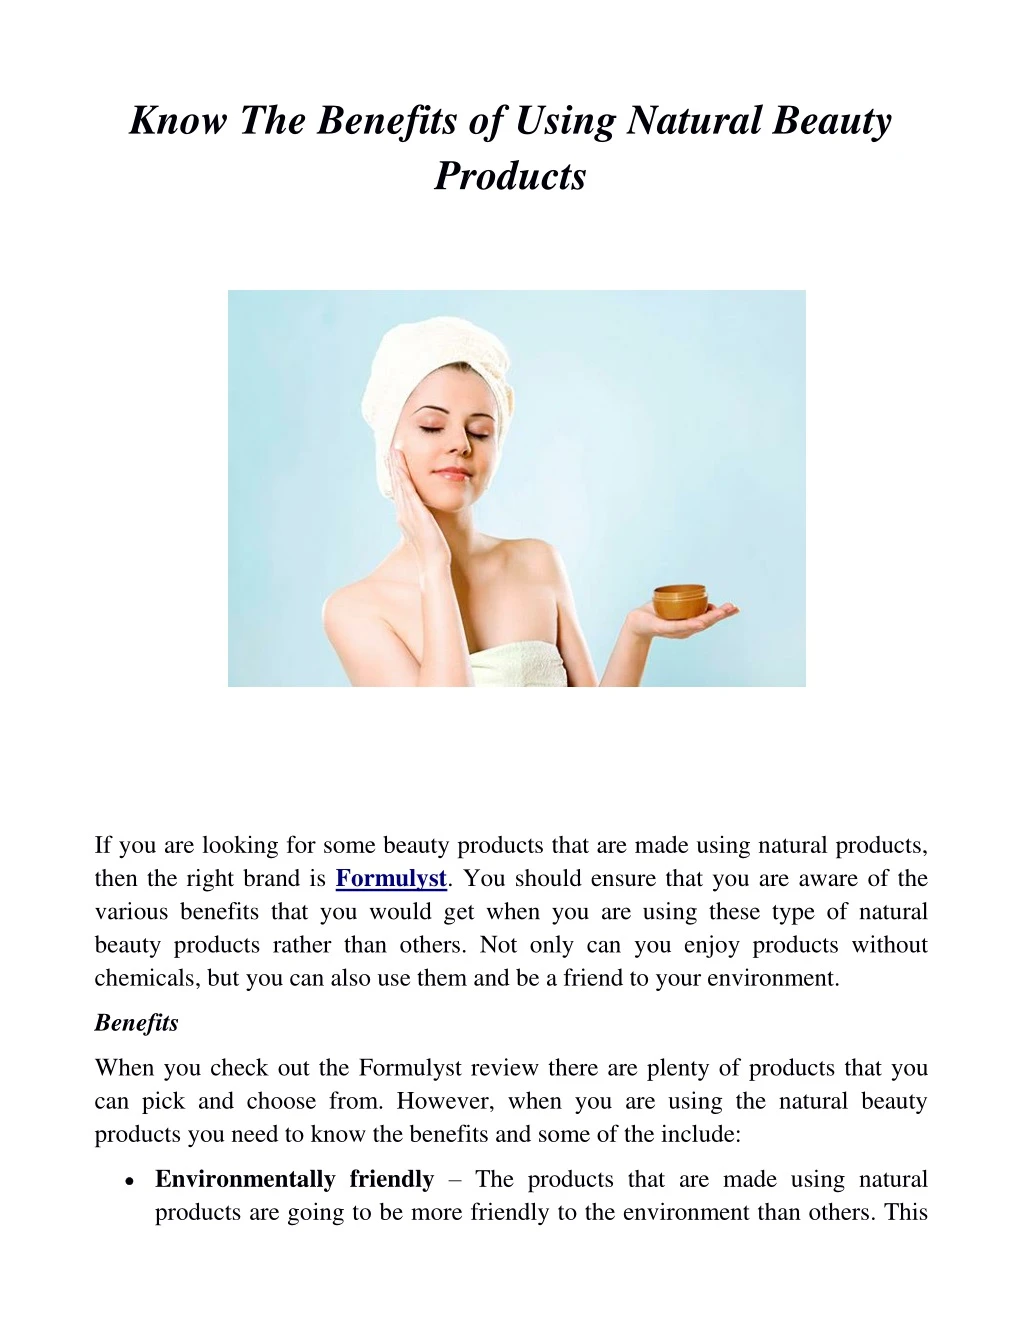 know the benefits of using natural beauty products